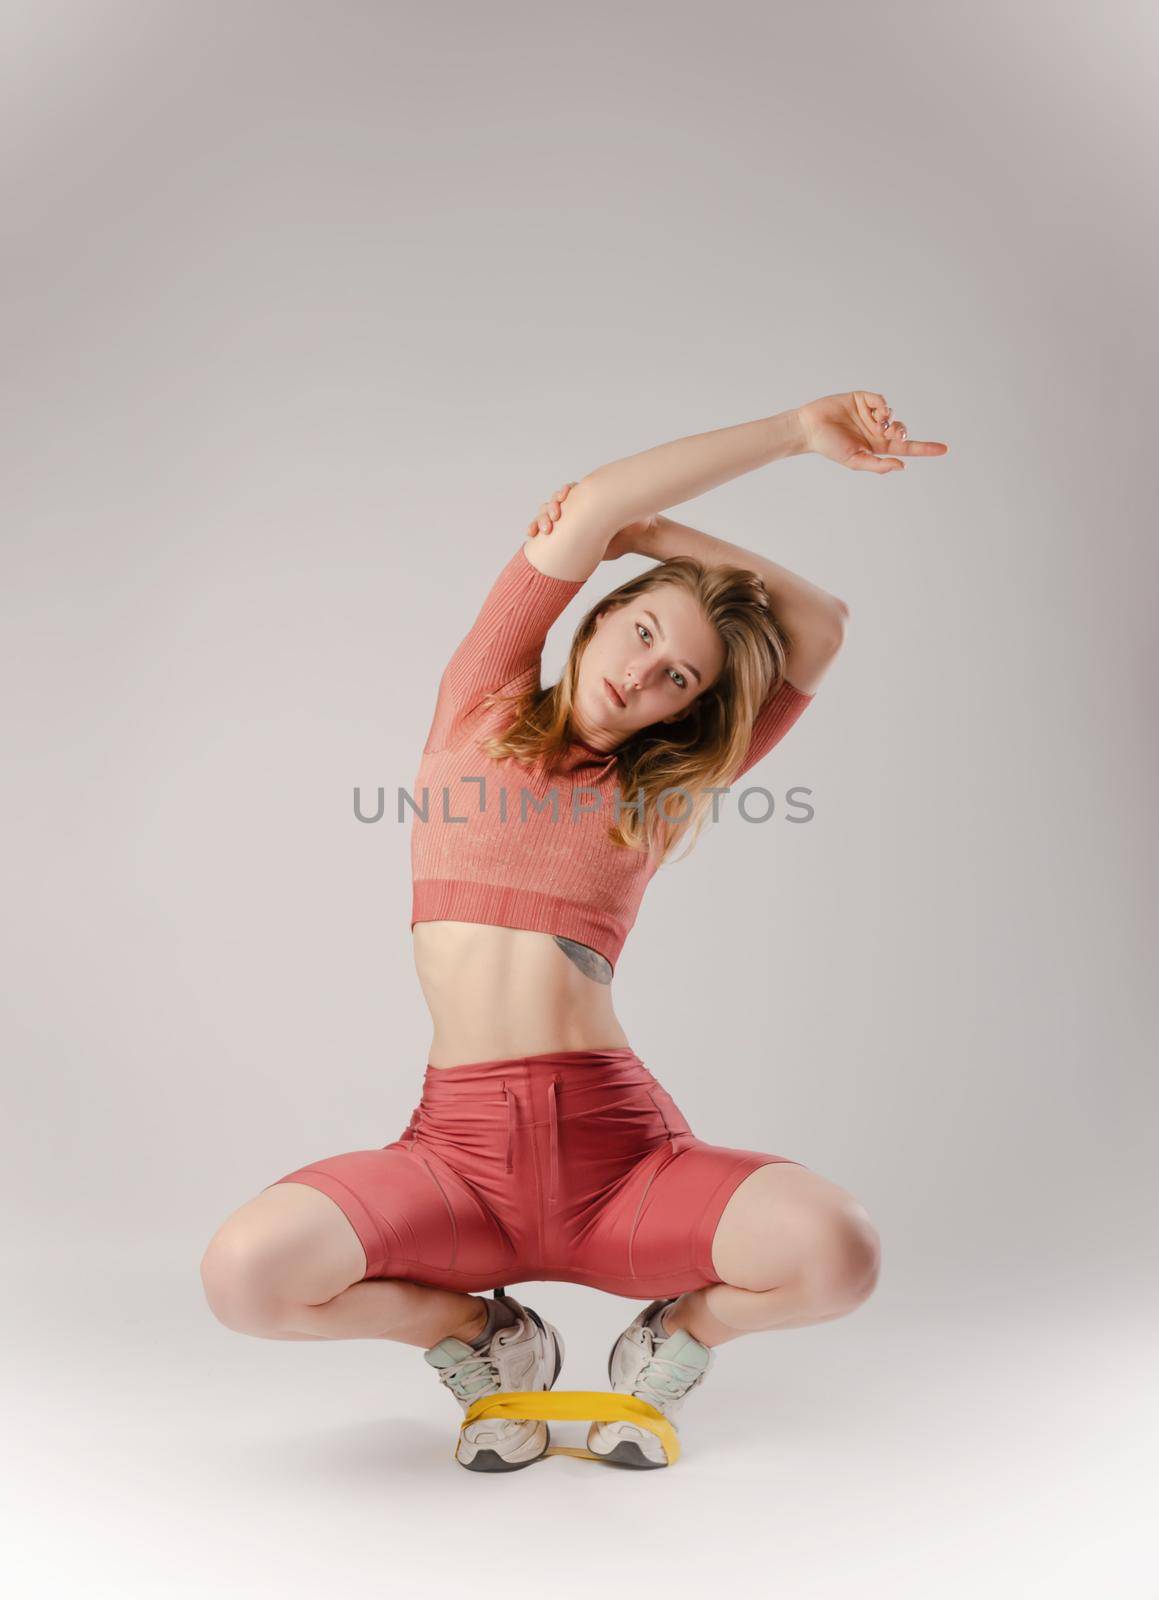 the athletic girl posing in the Studio on a white background